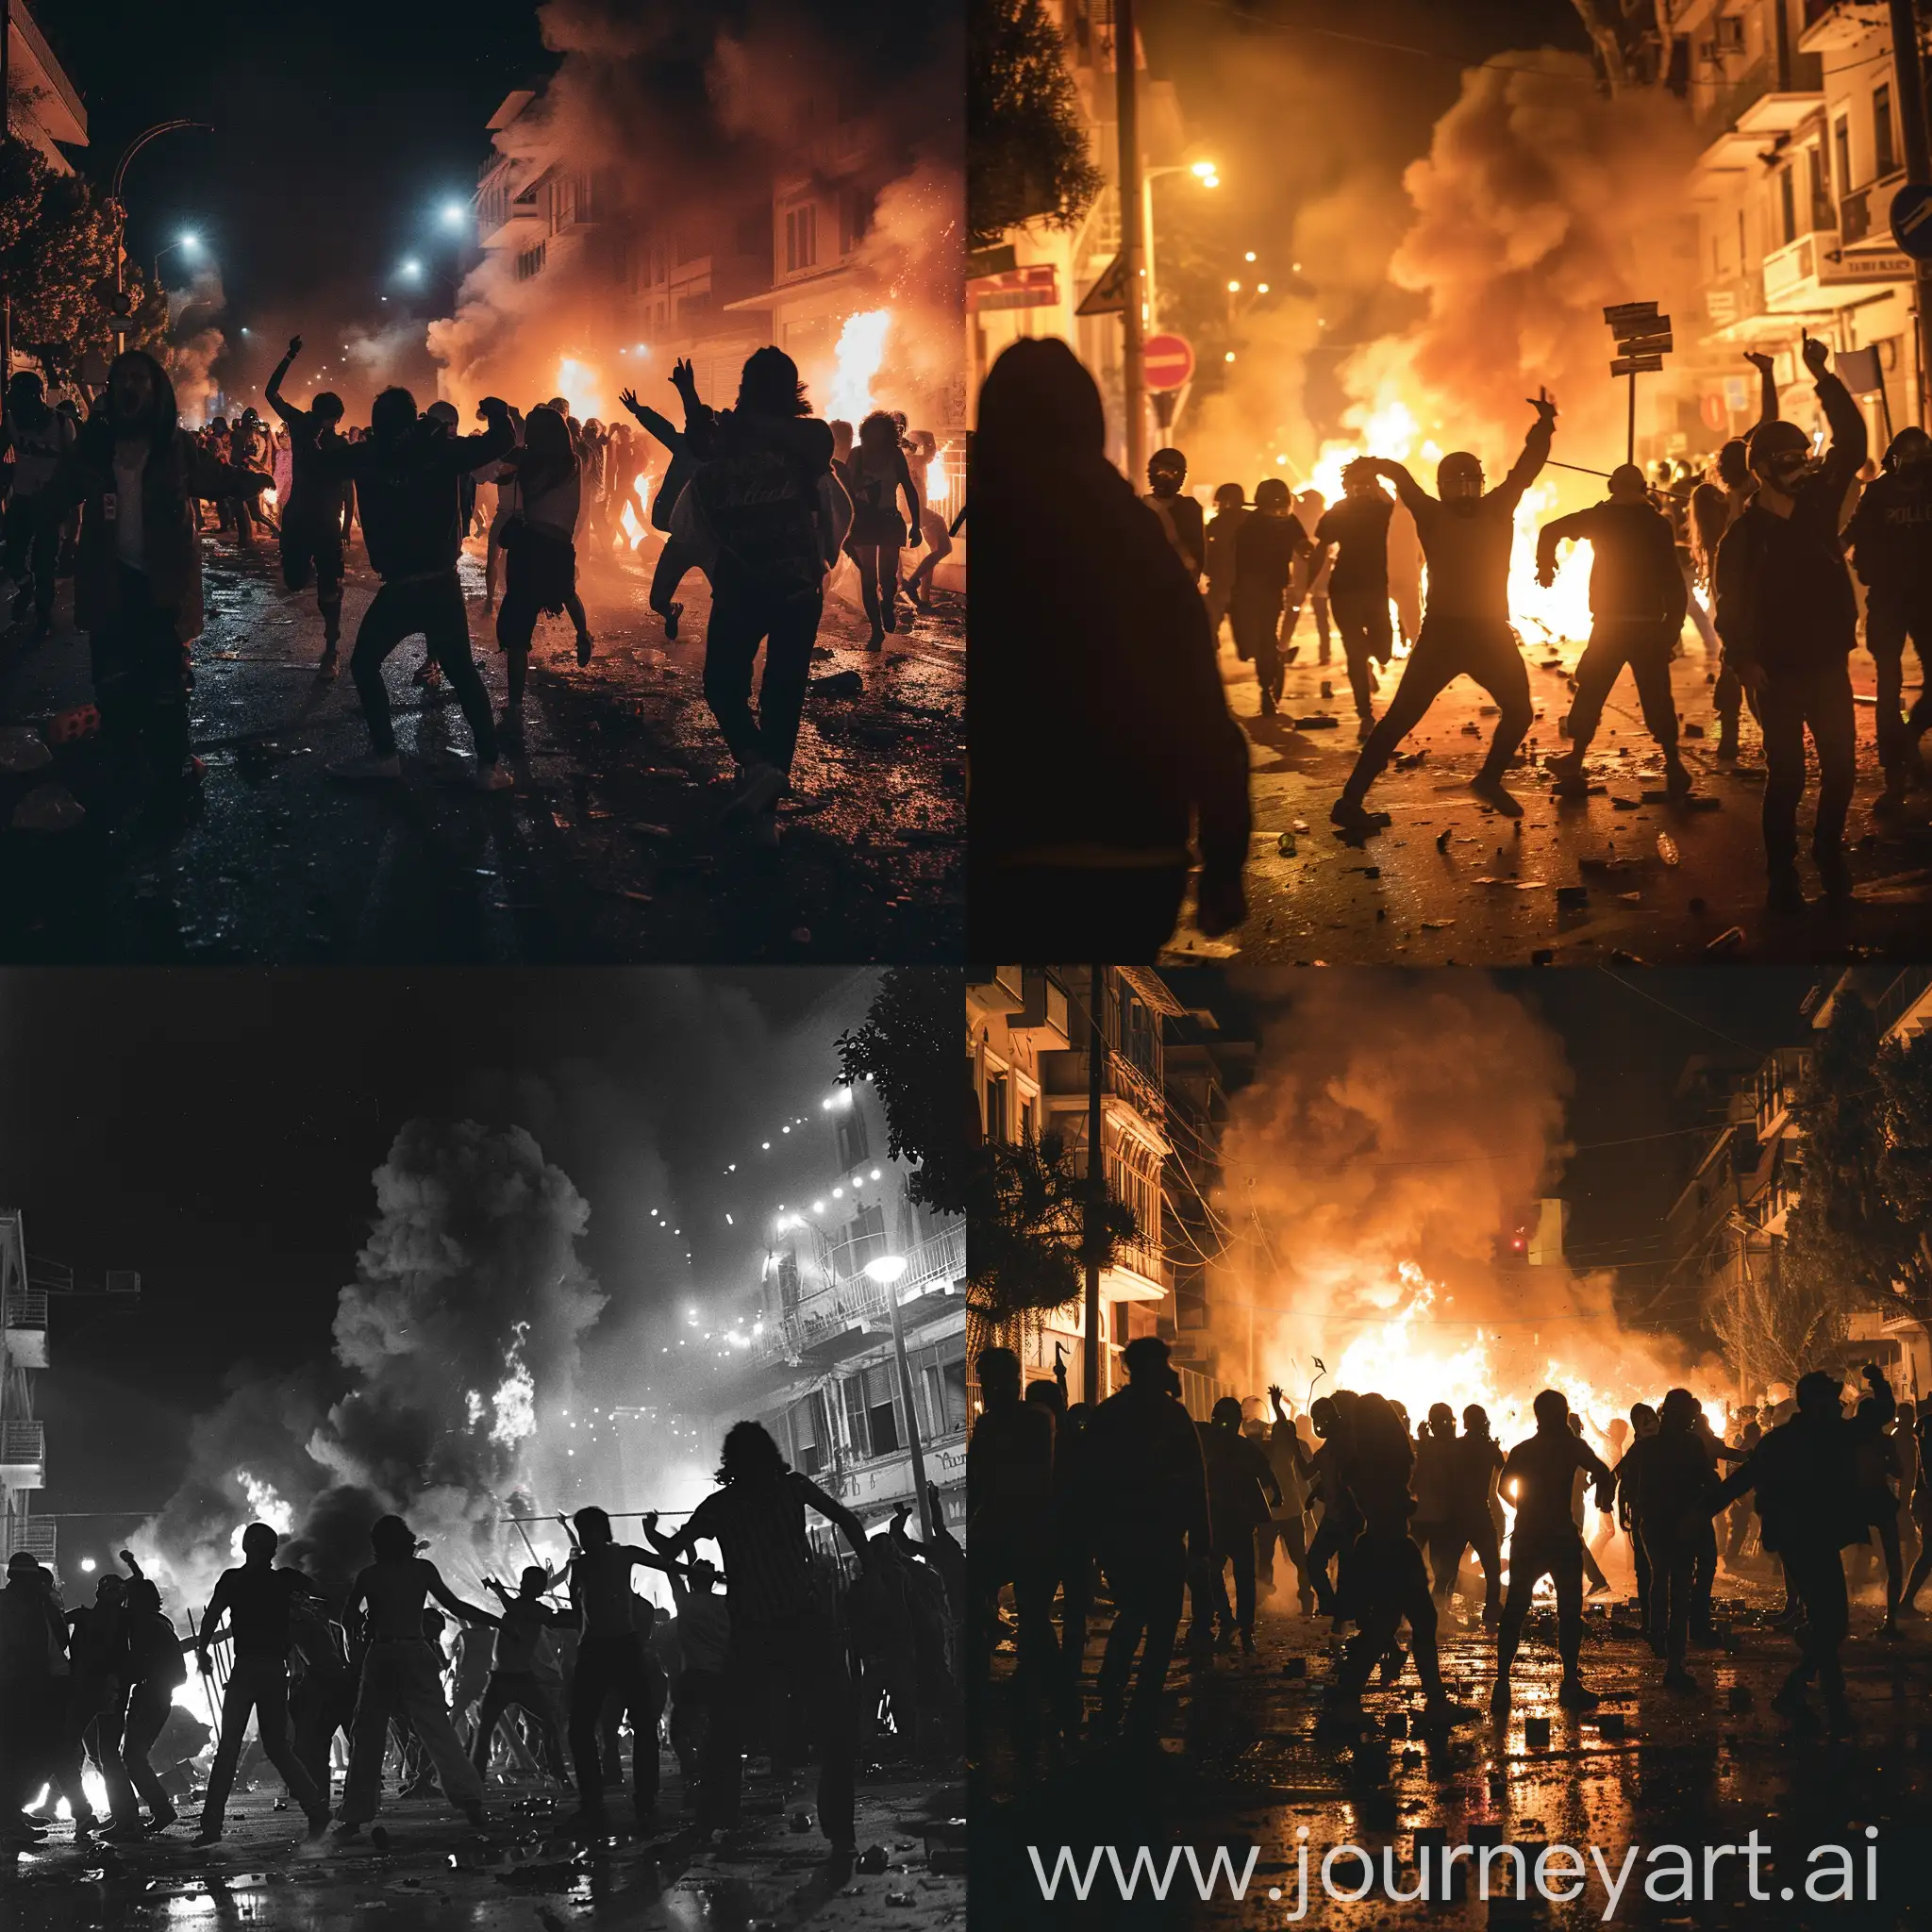 riots take place during the night, in the city of athens, while people dance in front of the barricades, creating a revolutionary and majestic atmosphere, police is burned by molotvs and music